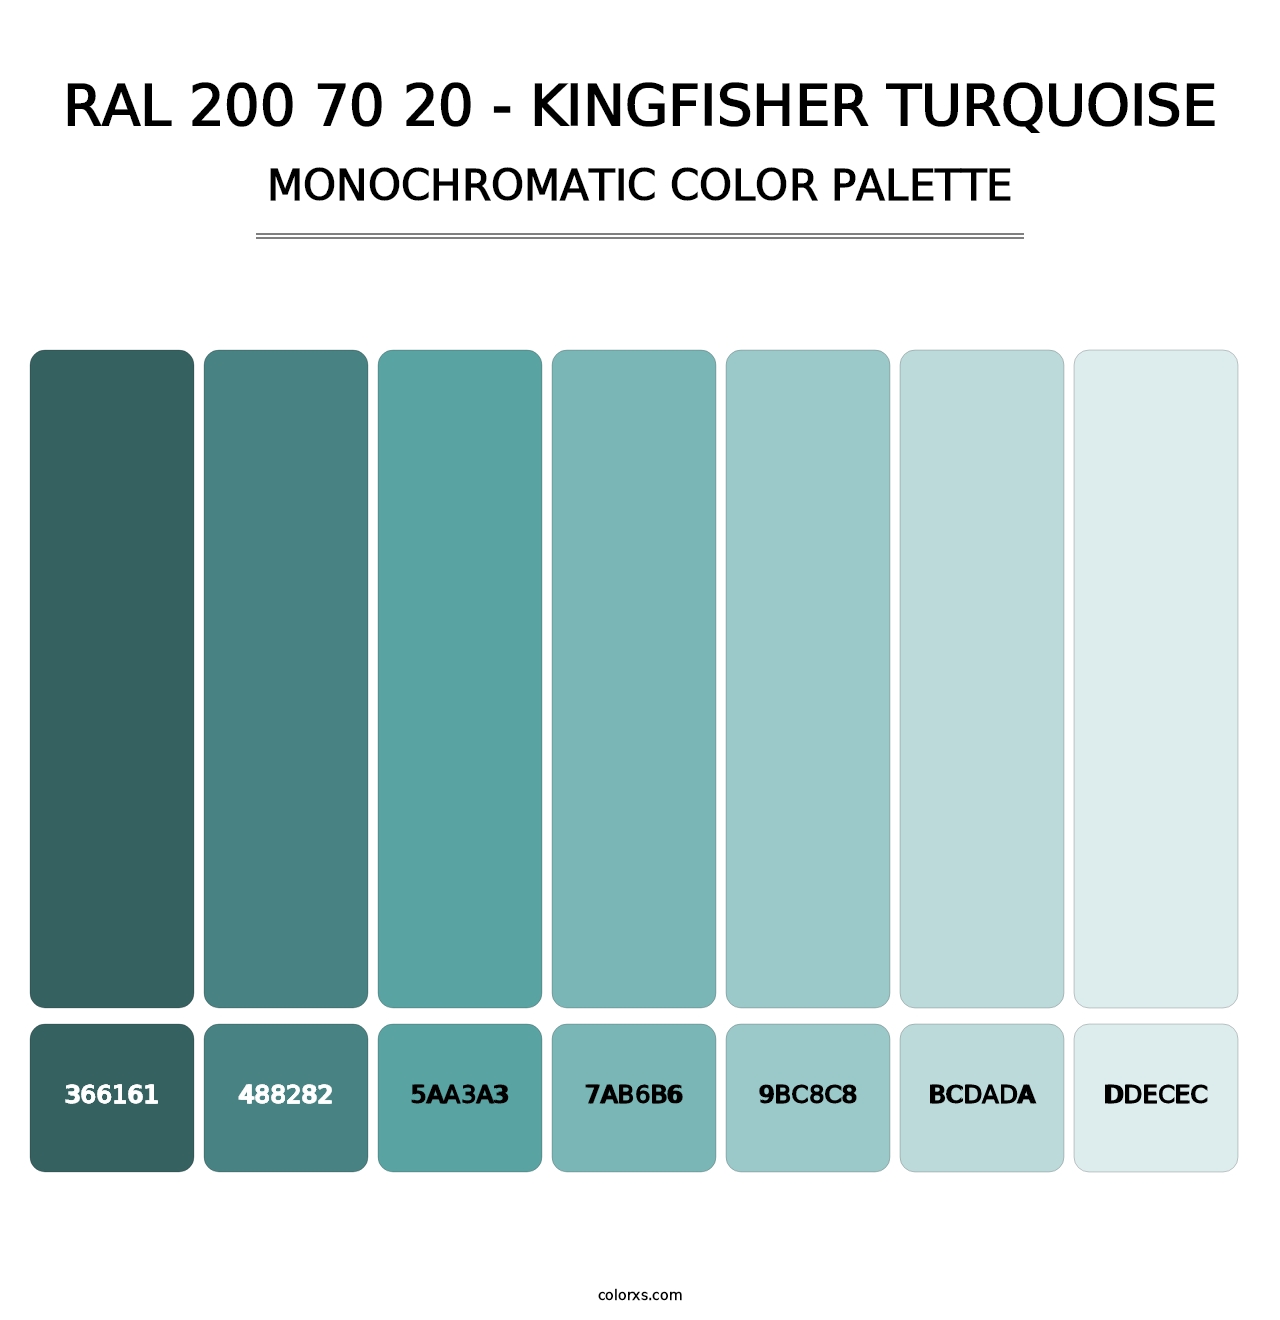 RAL 200 70 20 - Kingfisher Turquoise - Monochromatic Color Palette